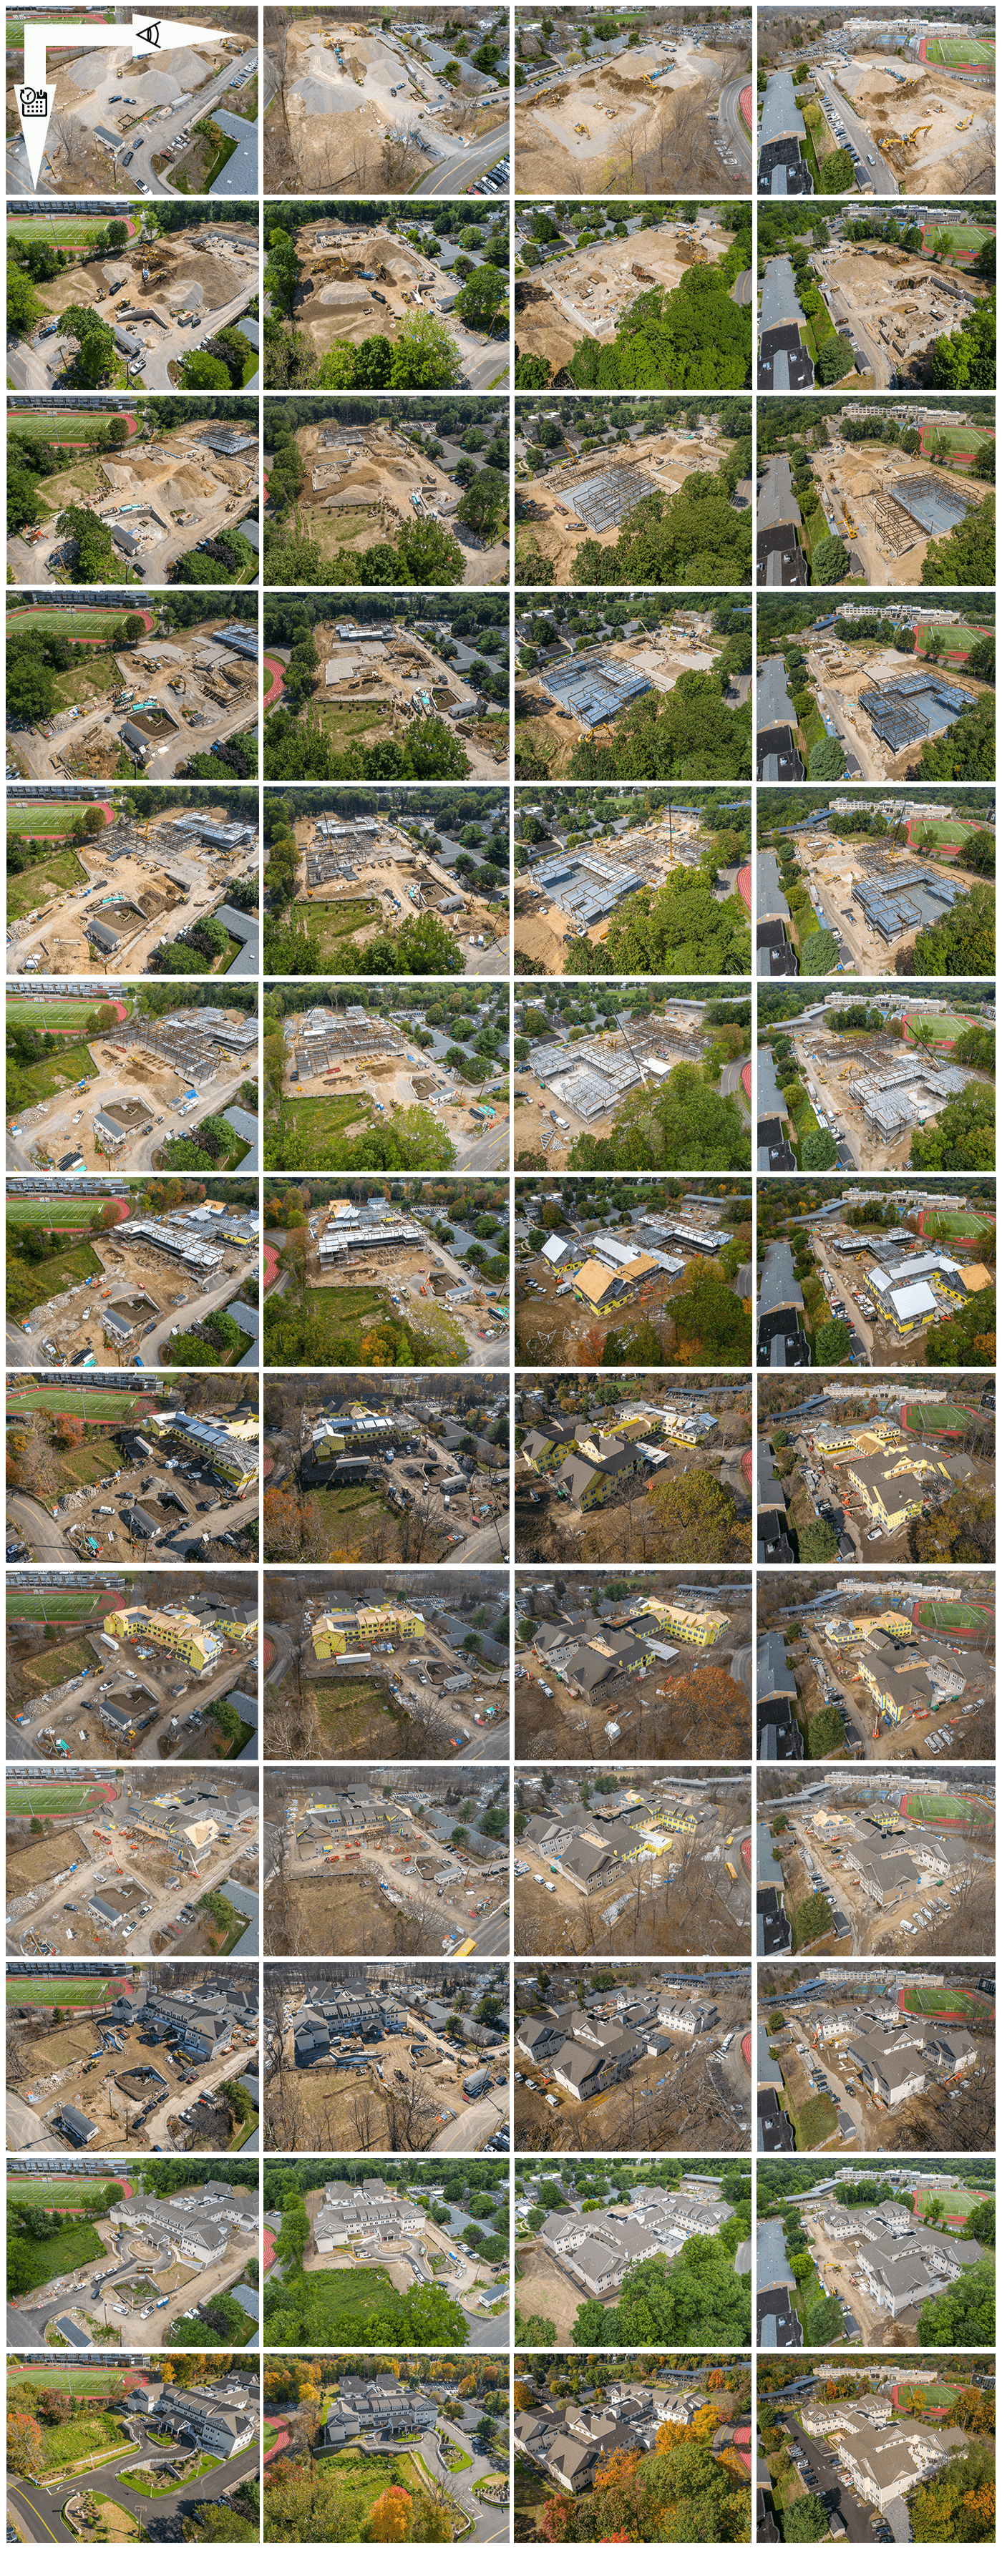 Construction Progress Drone Photography in CT by Photoflight Aerial Media